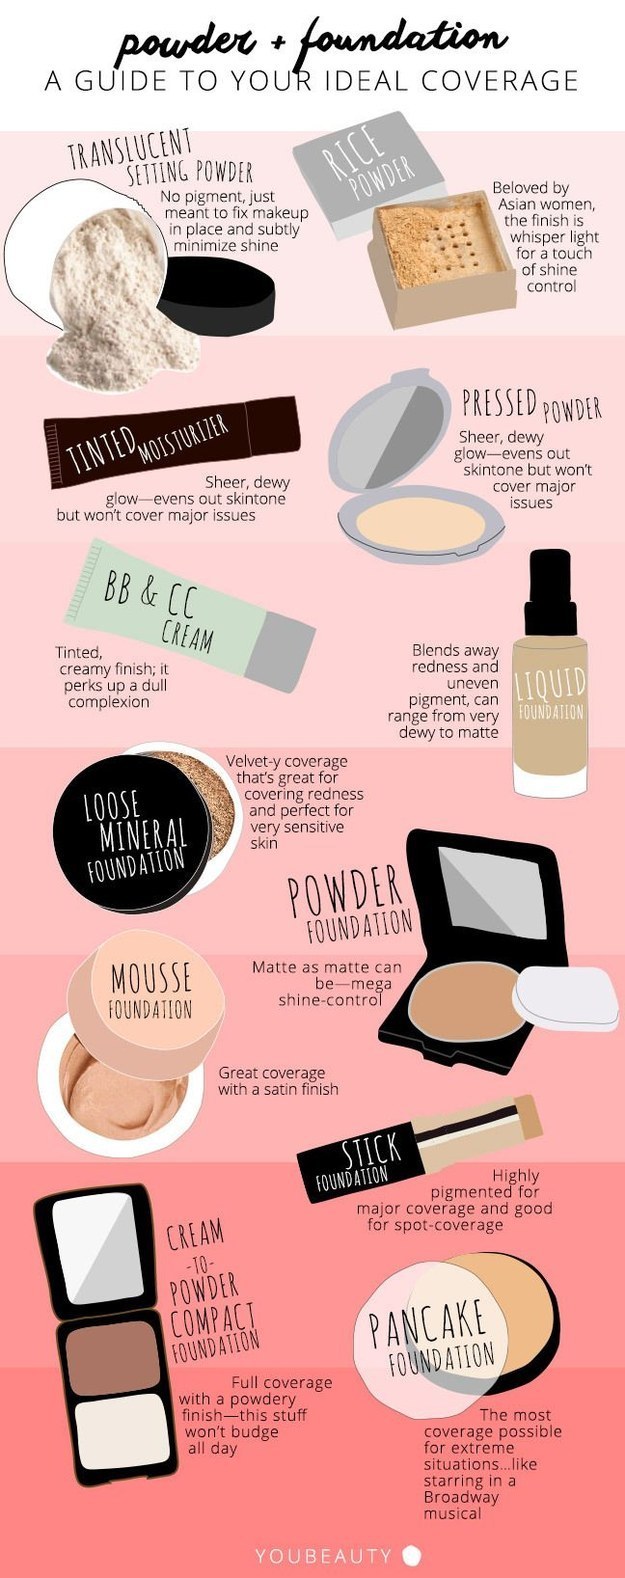 makeup tips chart - powder foundation A Guide To Your Ideal Coverage Translucent Setting Powder Powder No pigment, just meant to fix makeup in place and subtly minimize shine Beloved by Asian women, the finish is whisper light for a touch of shine control